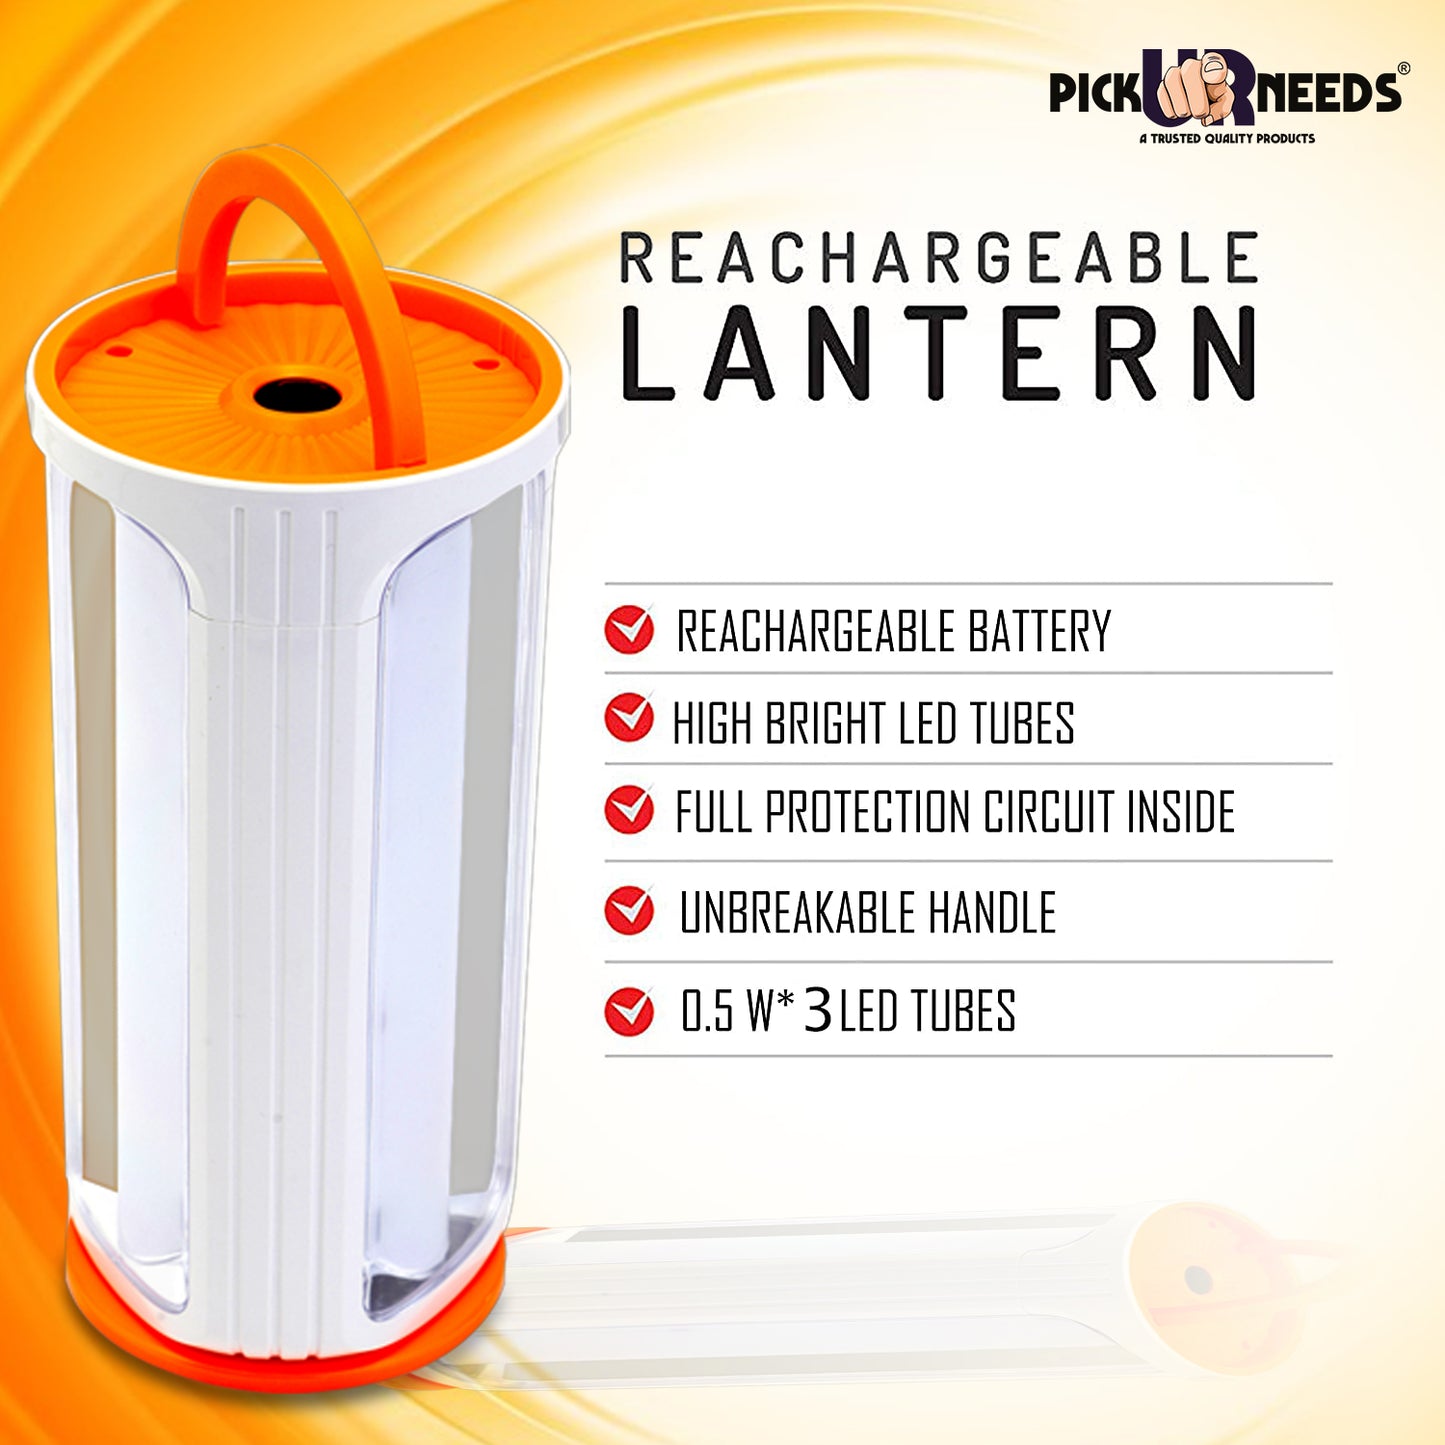 Pick Ur Needs Rechargeable 90W Home Emergency Light 3 Side Tube Floor Lantern Lamp with Hanging Handle